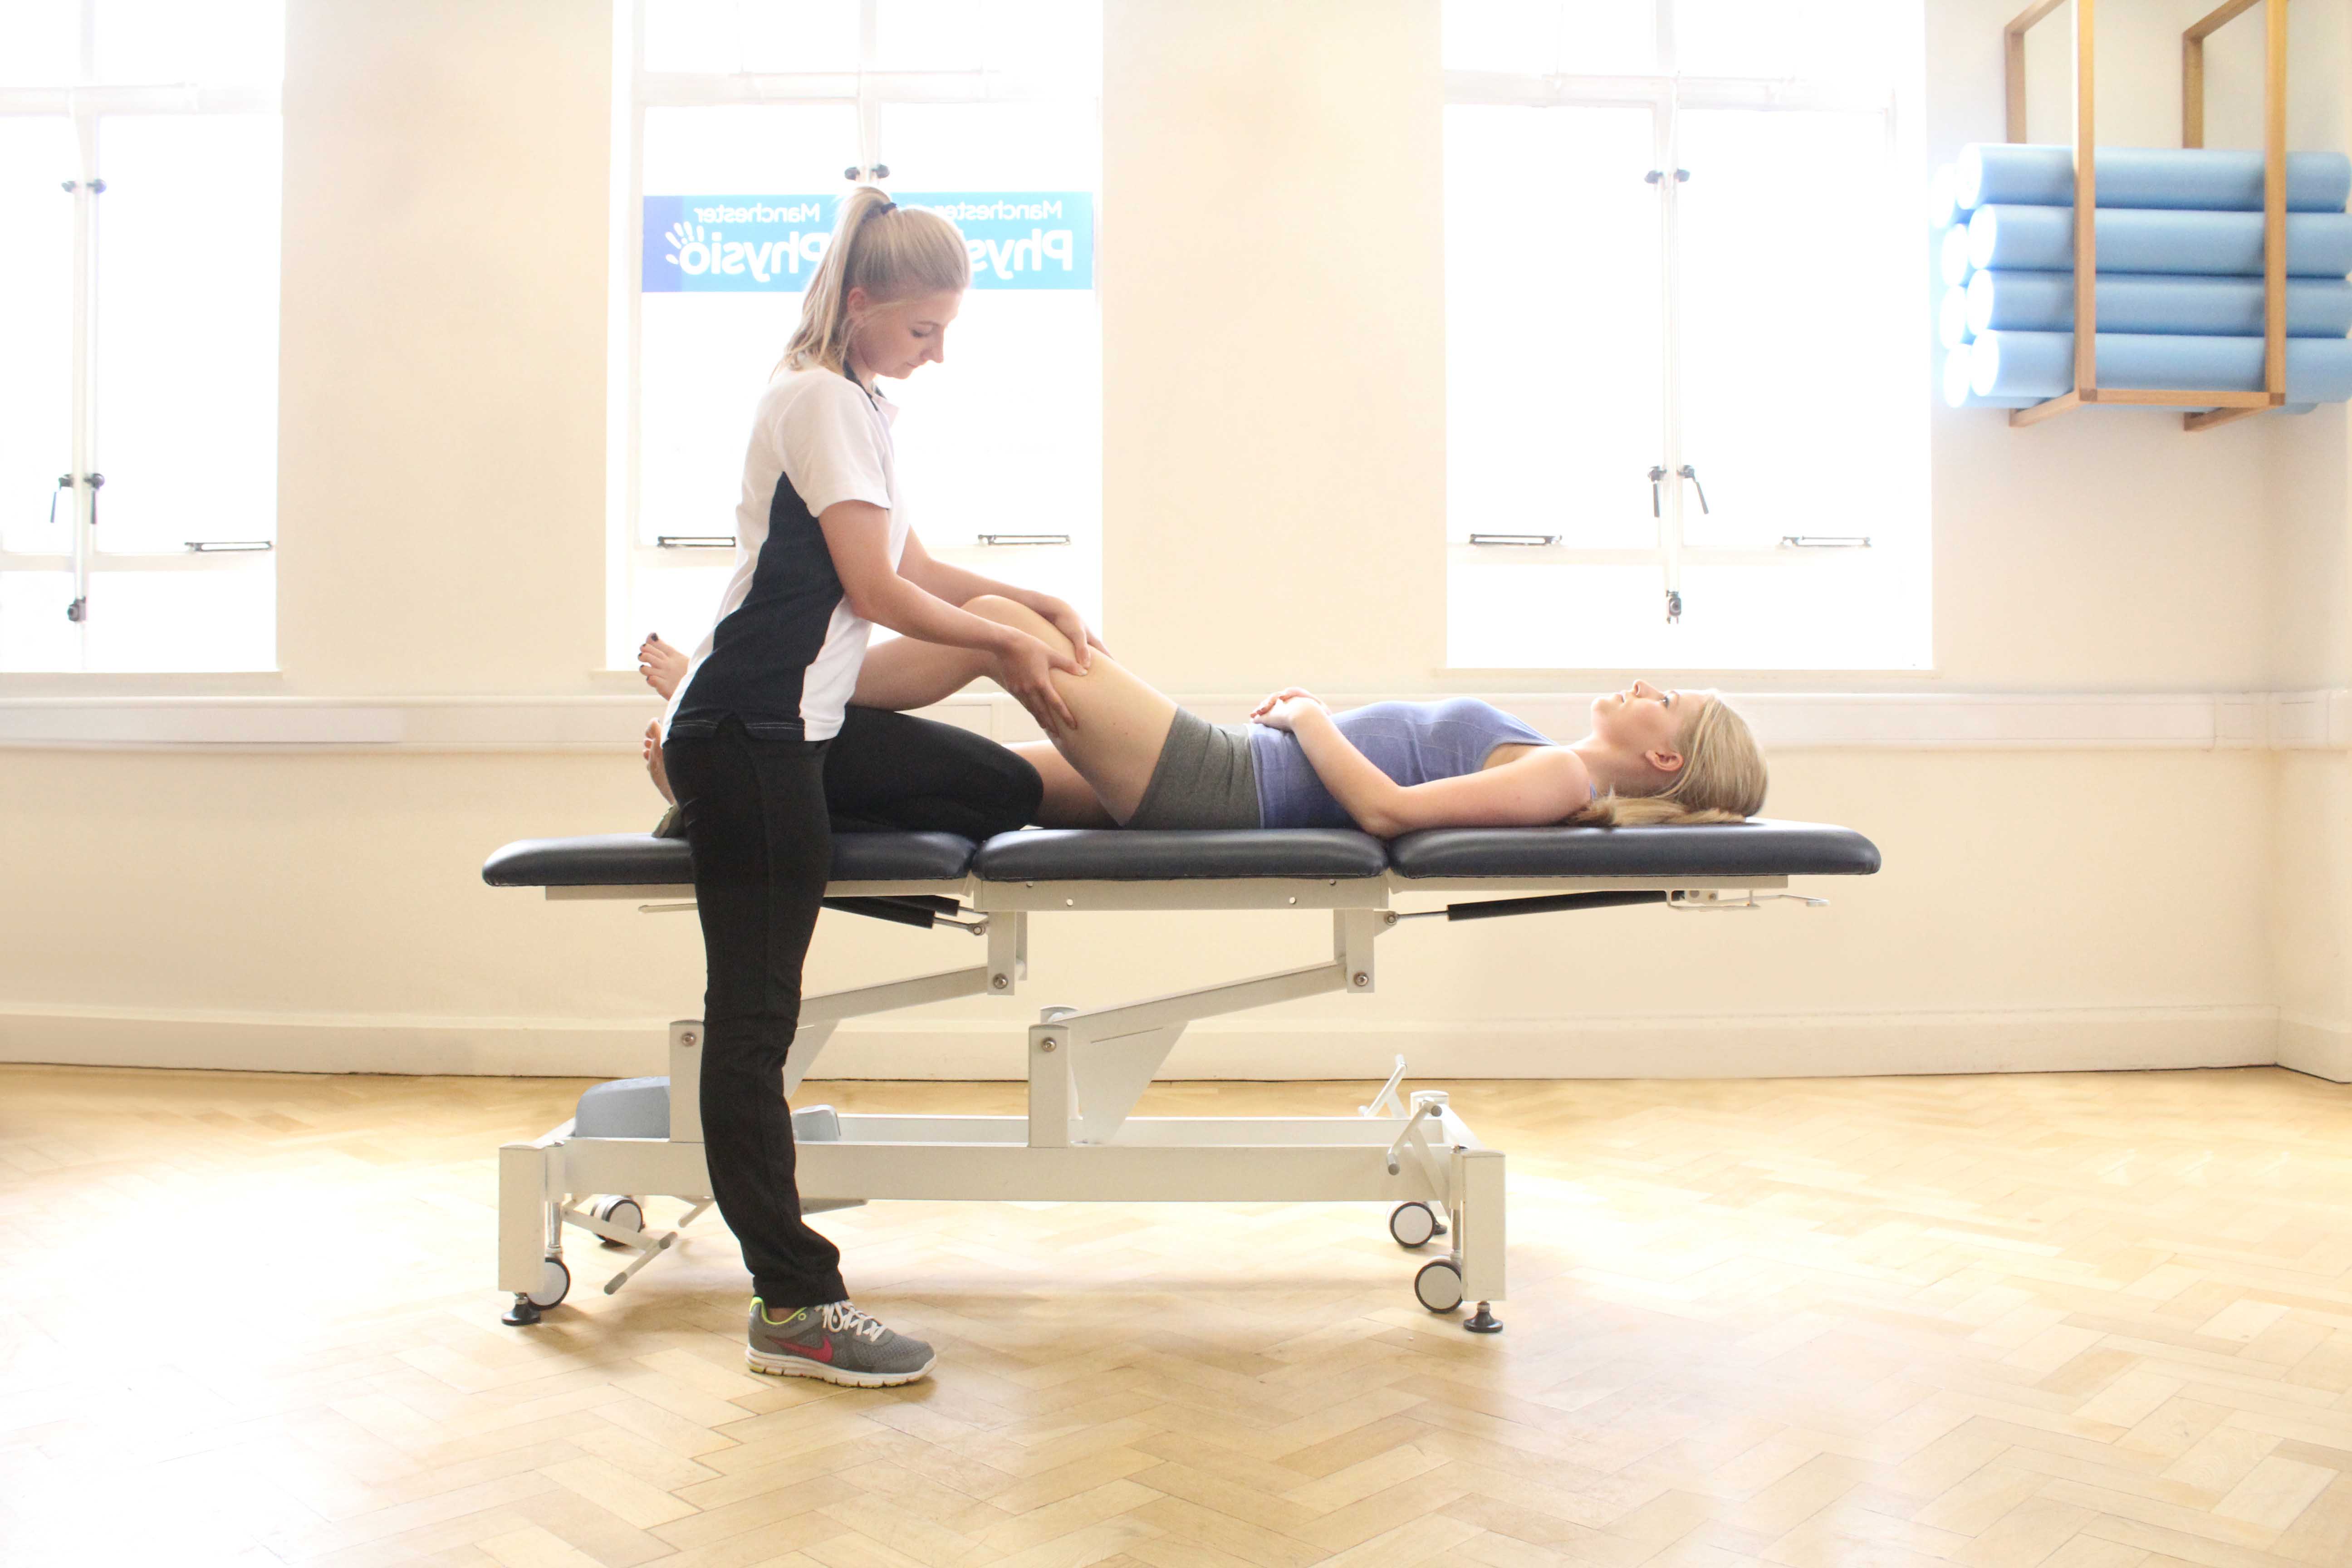 Trigger point massage applied to the quadricep muscles